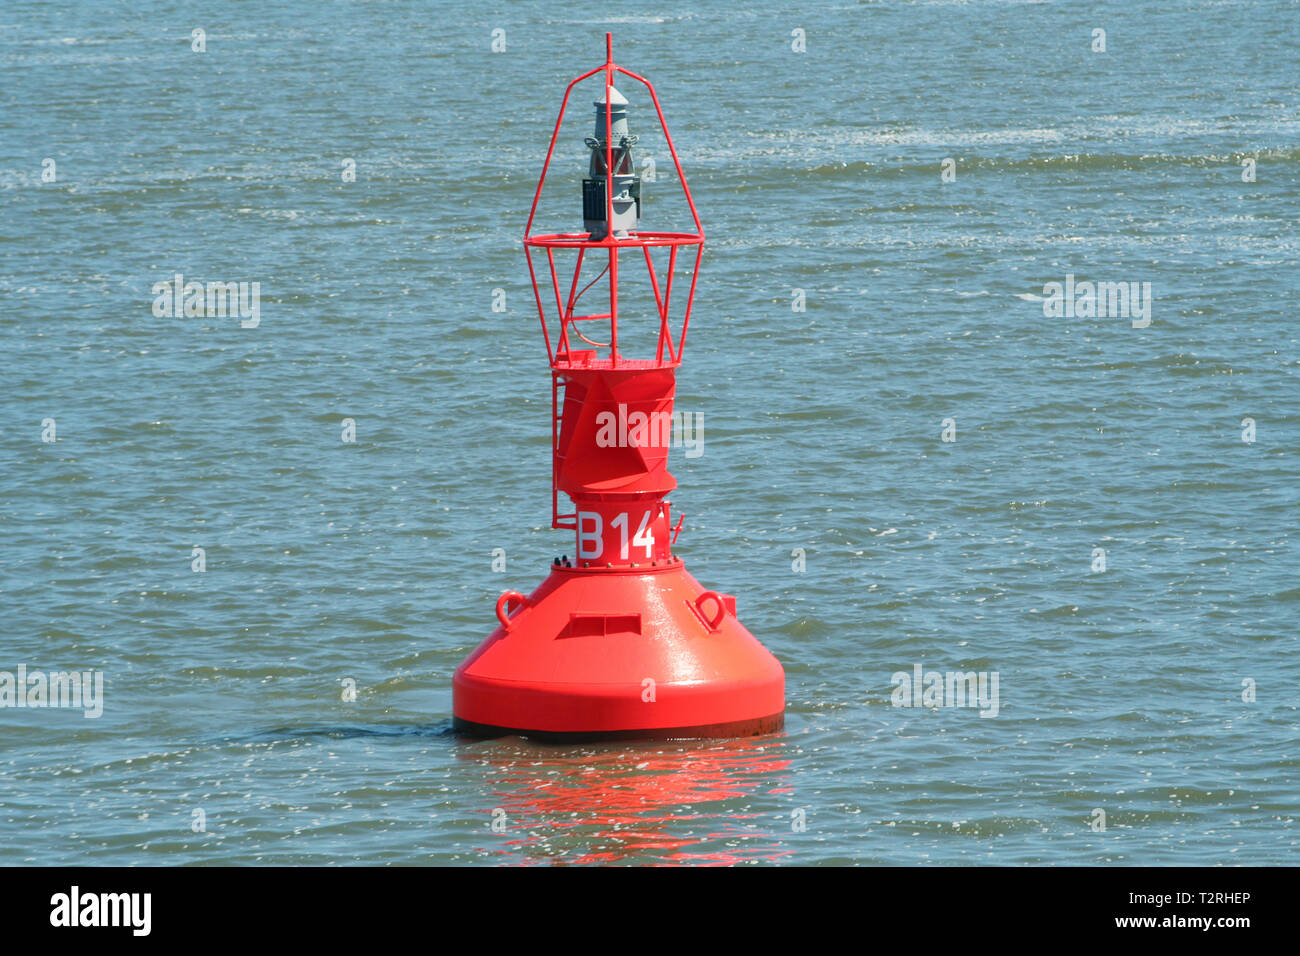 A buoy in the North Sea Stock Photo